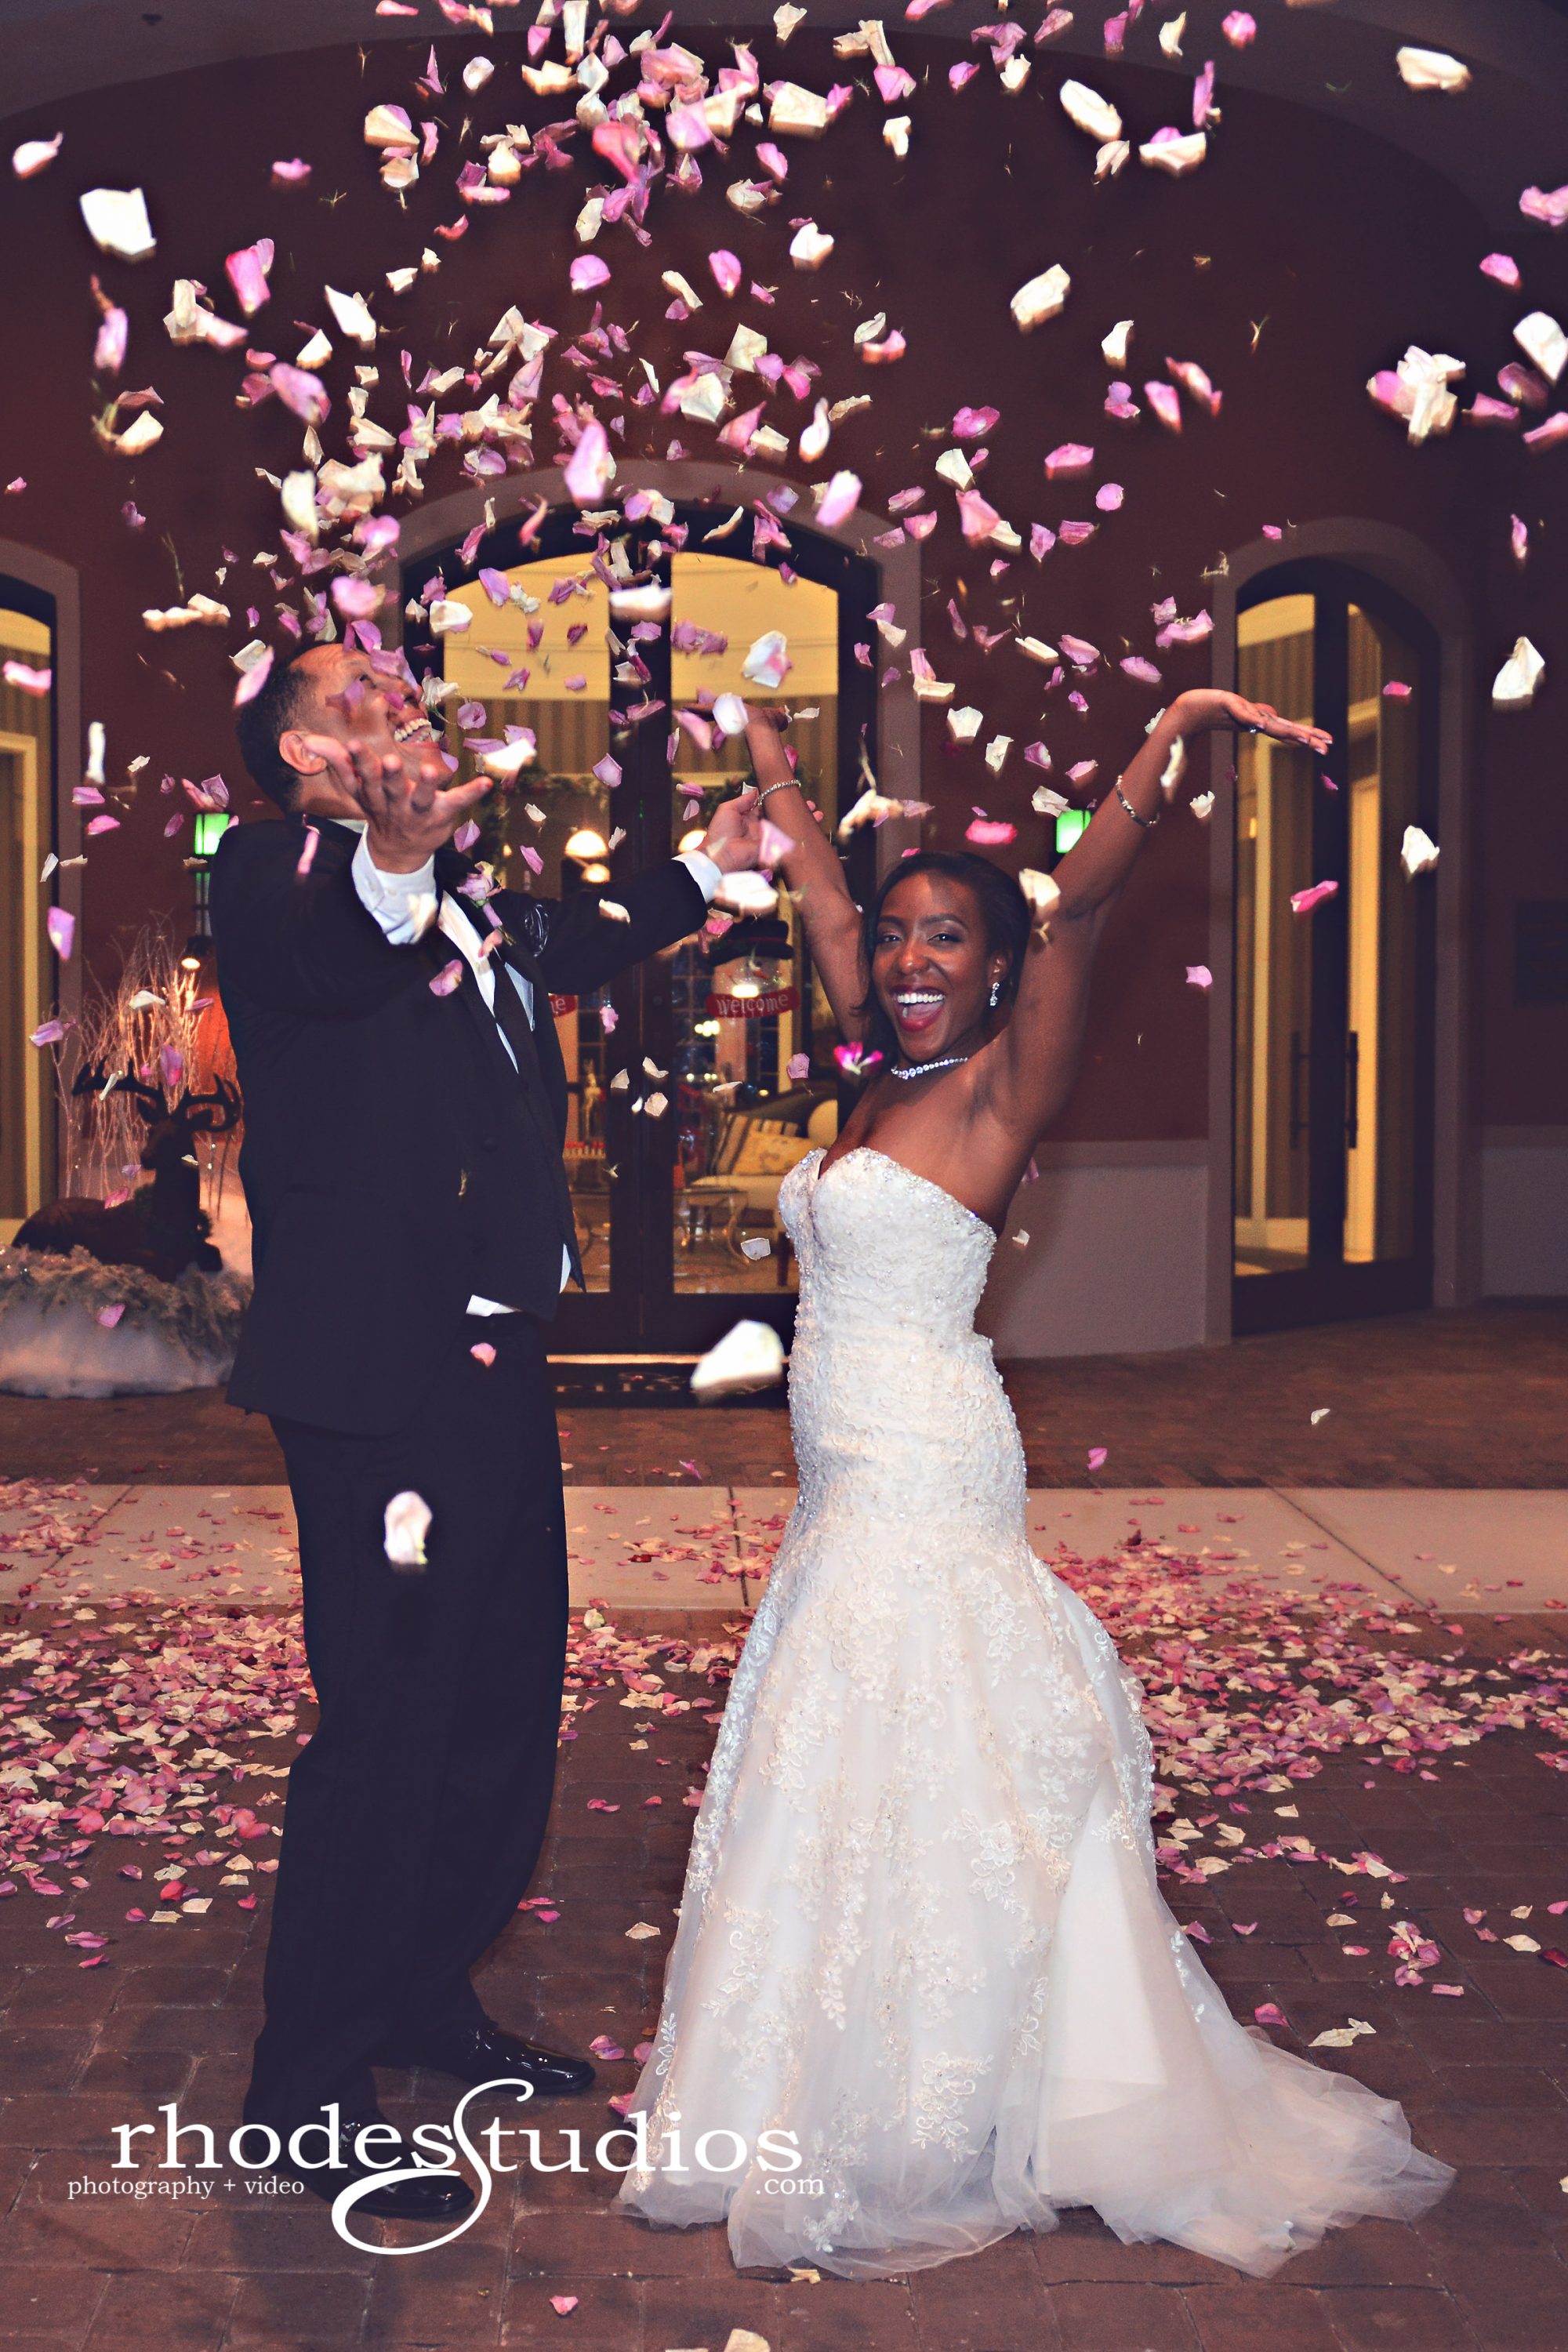 Magnolia House - bride and groom throwing flower petals like confetti